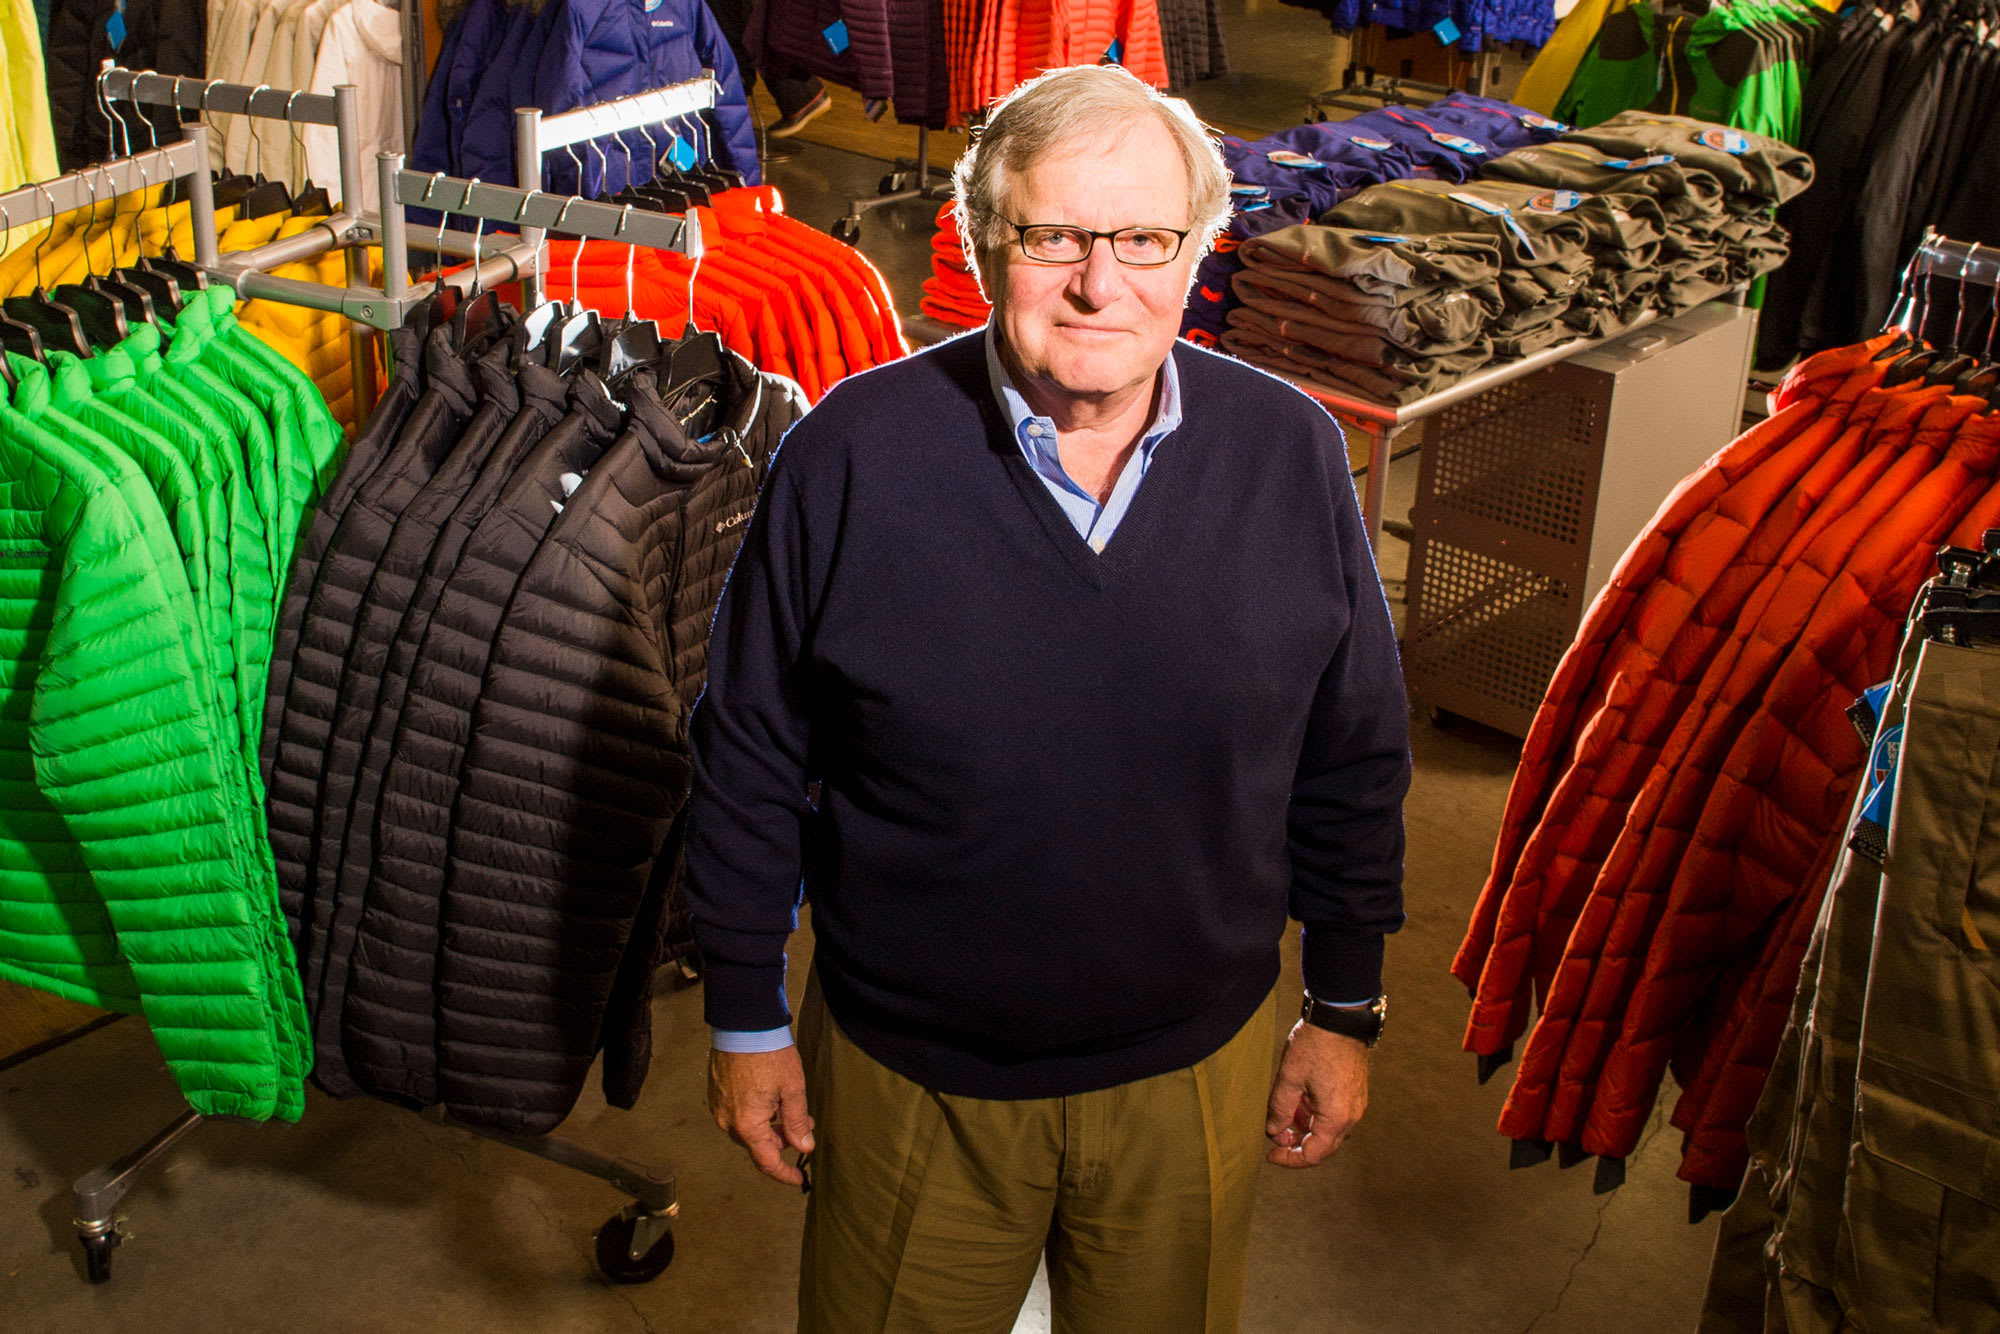 Columbia Sportswear CEO says China is not a 'big bad market'